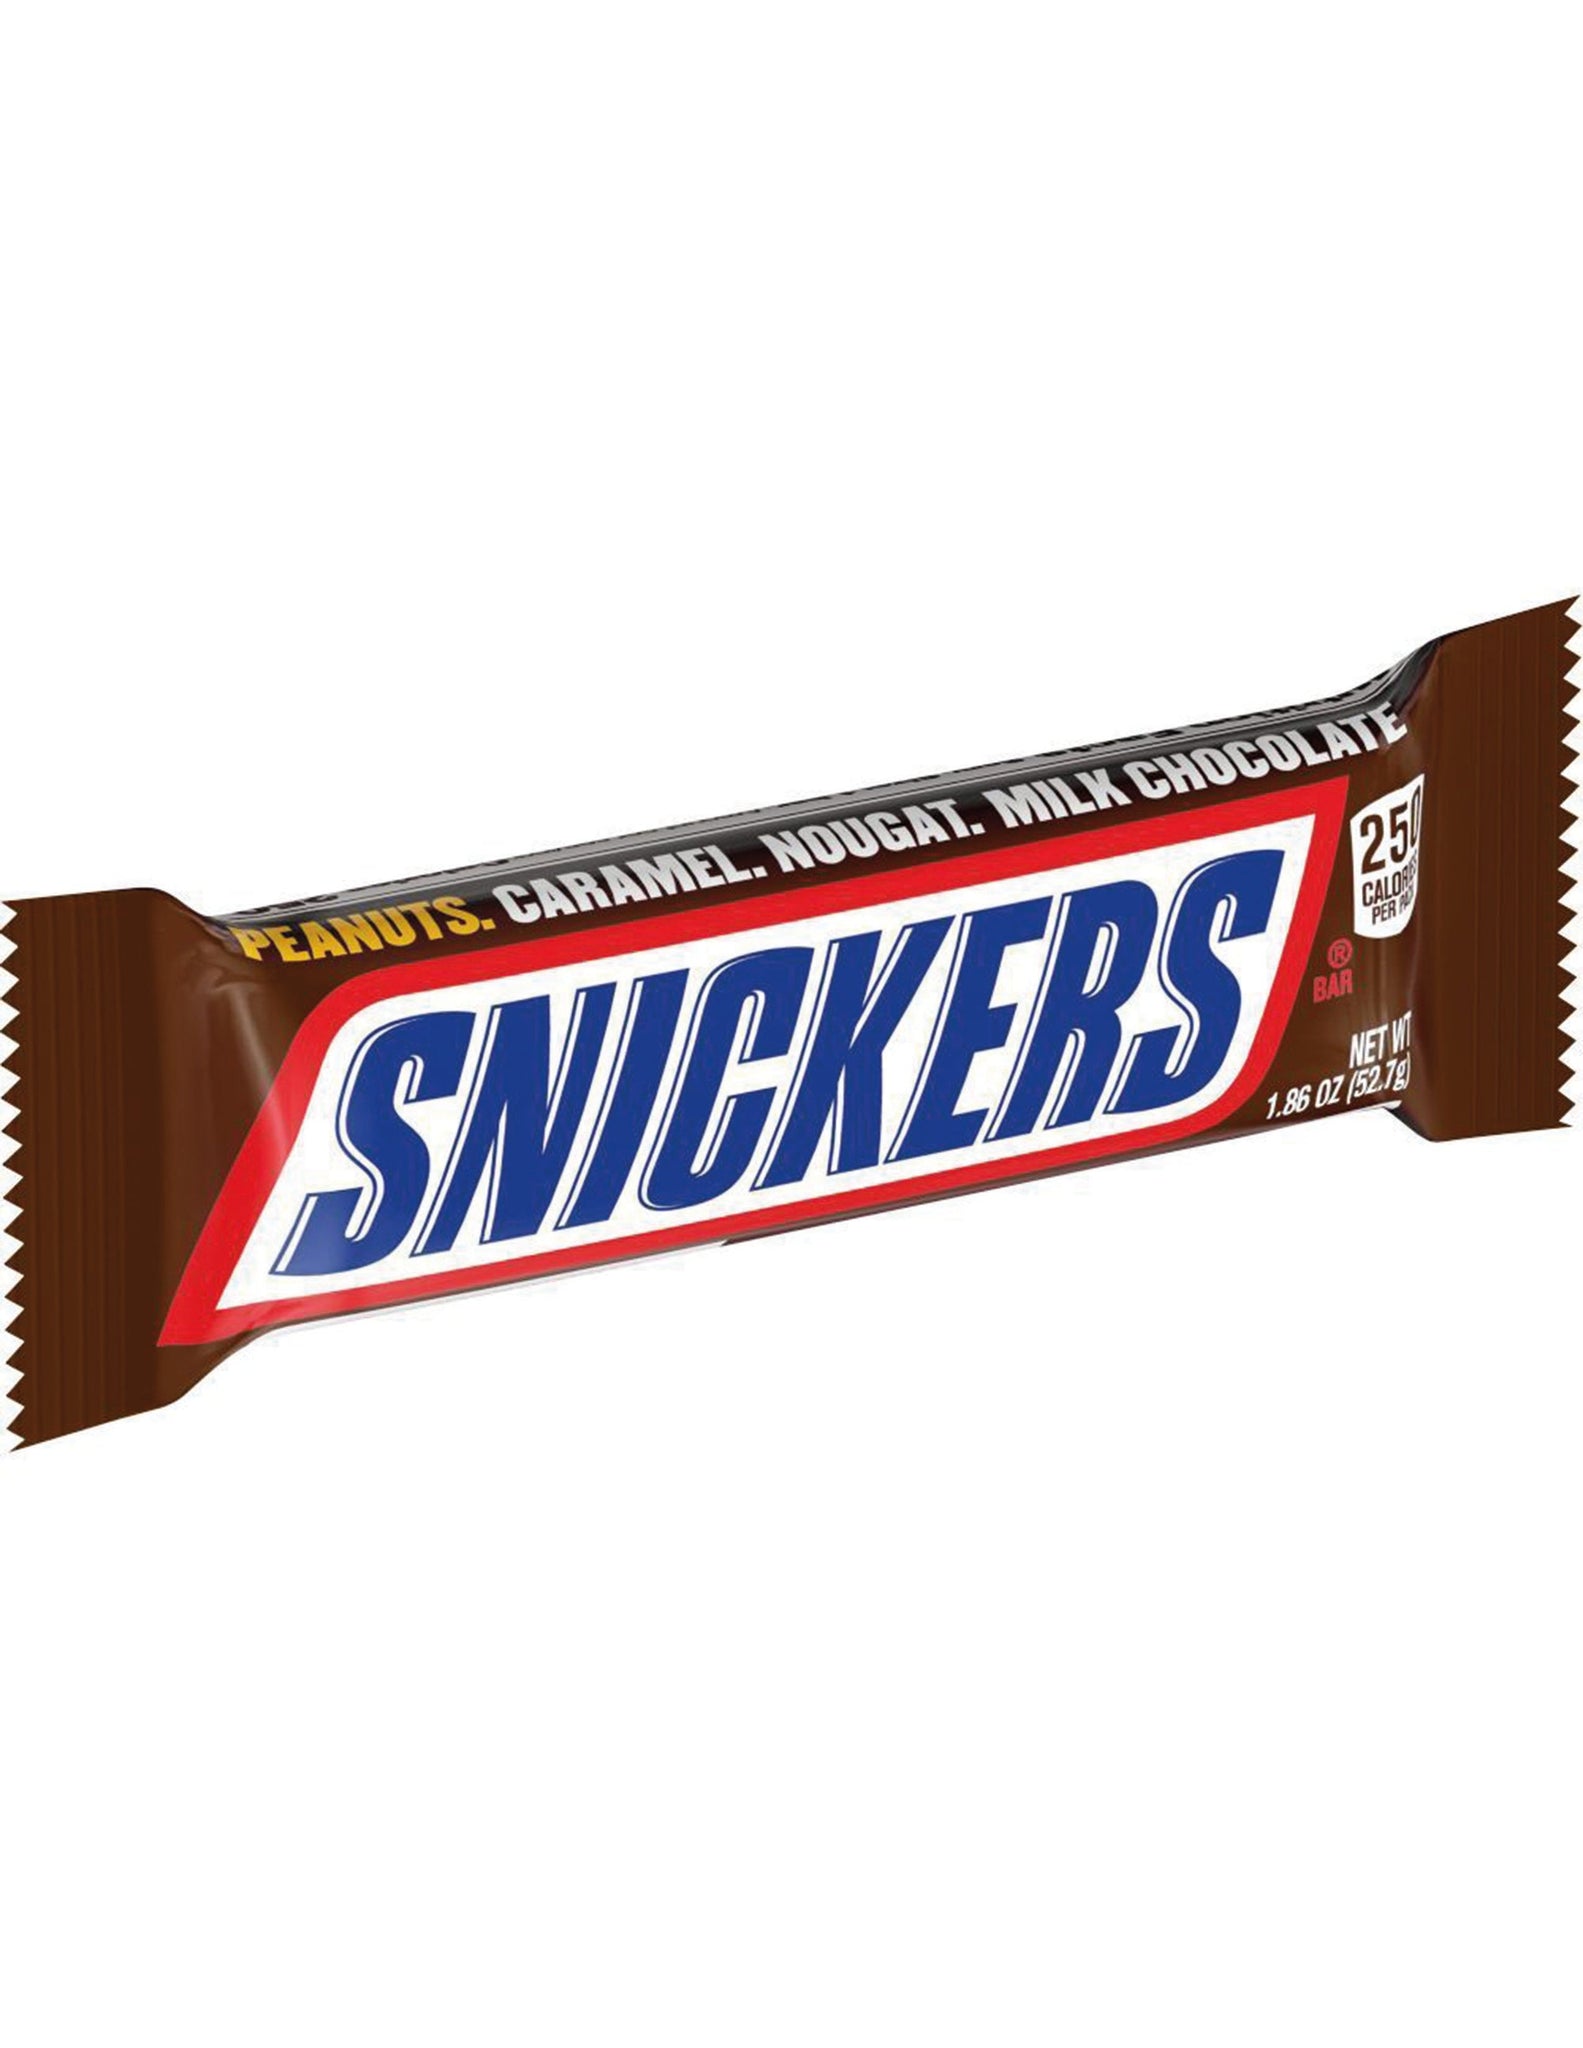 bah>Snickers, one